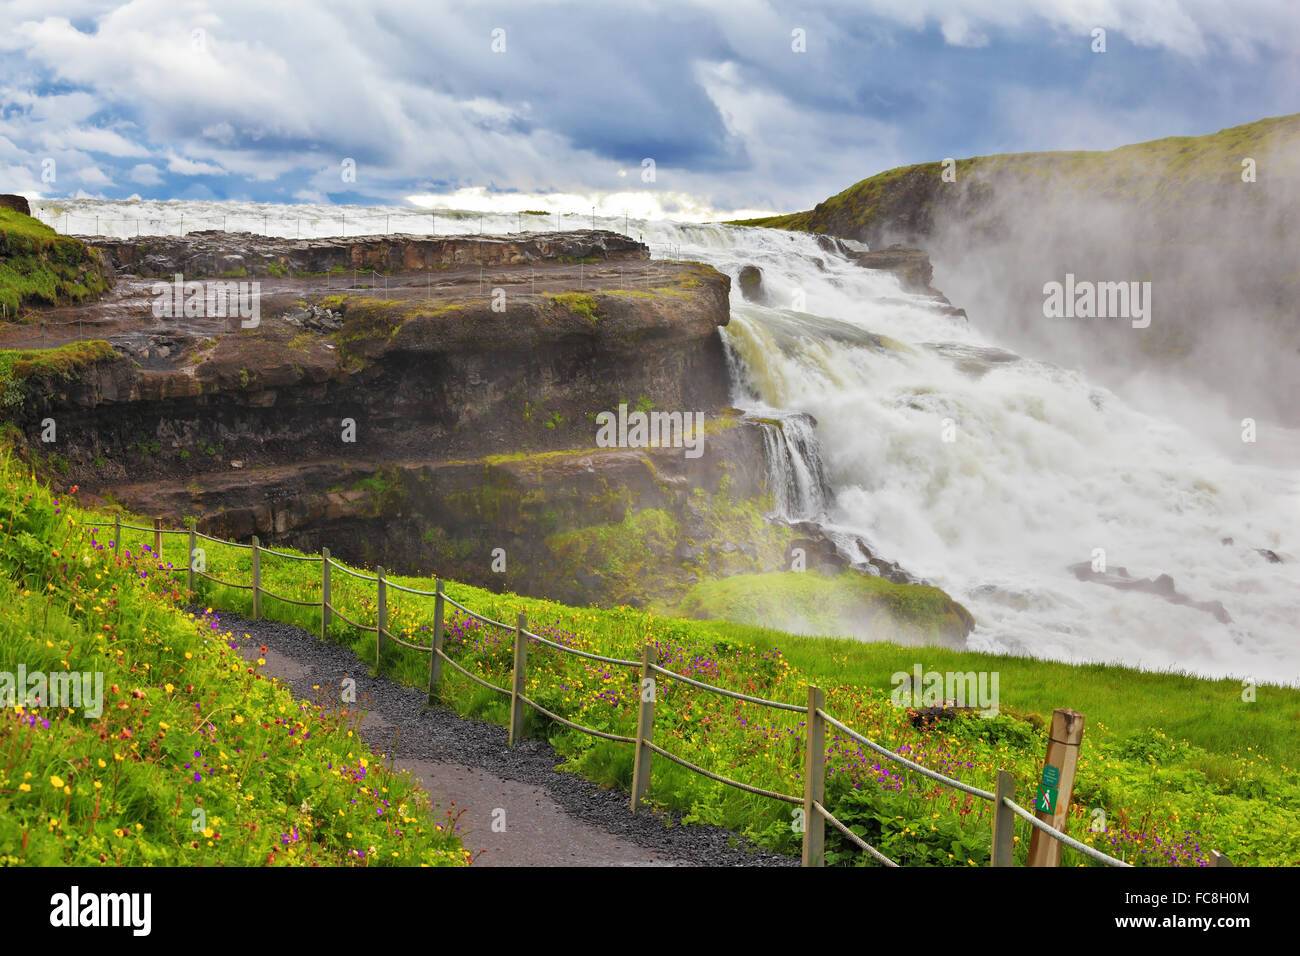 Powerful waterfall and convenient path Stock Photo